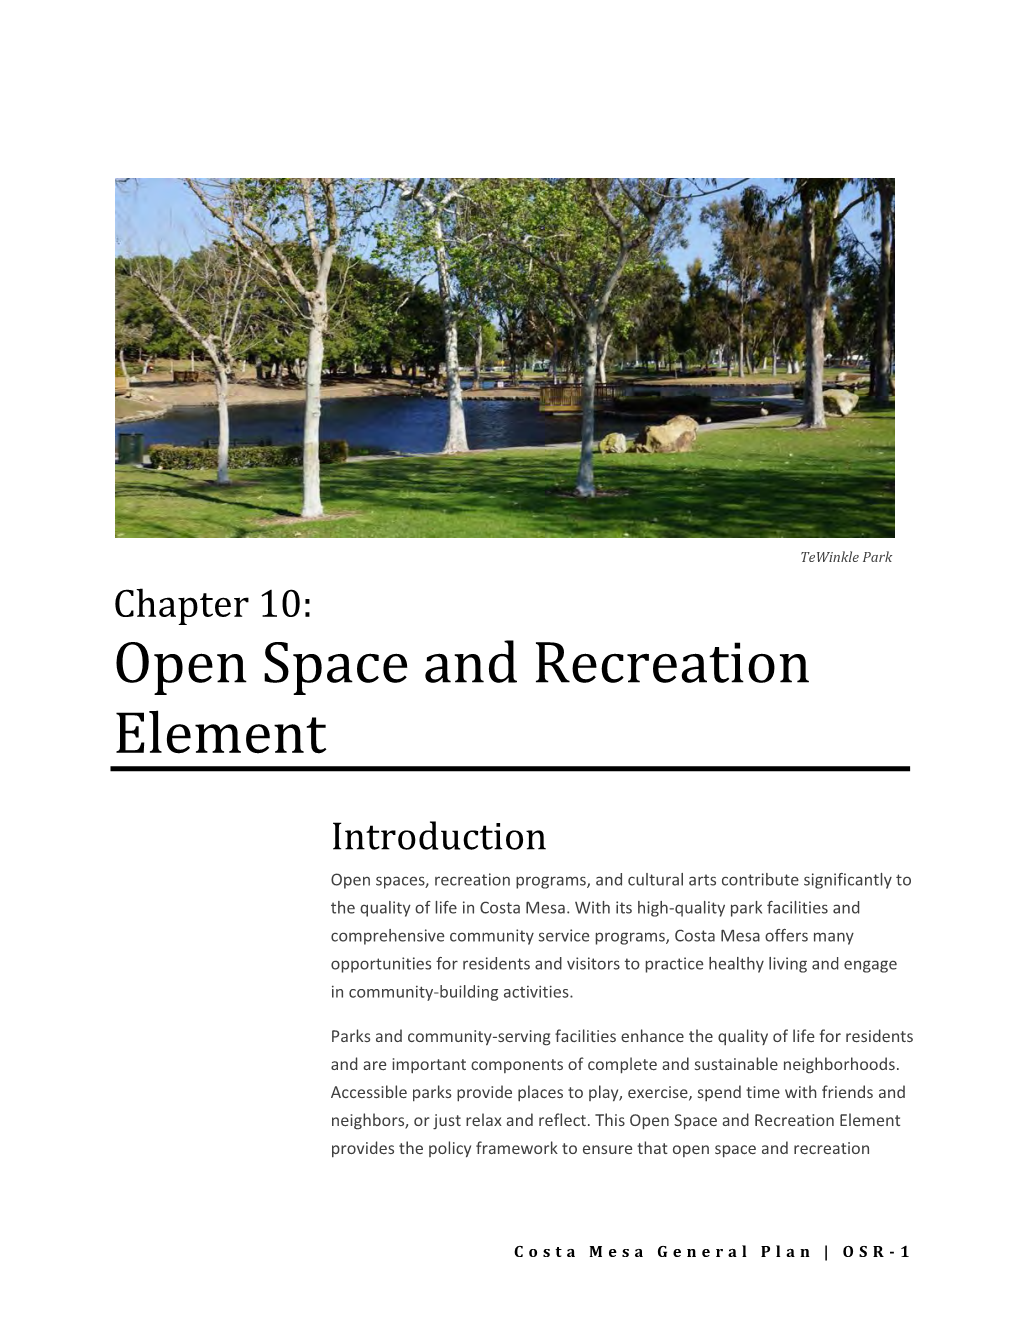 Chapter 10: Open Space and Recreation Element